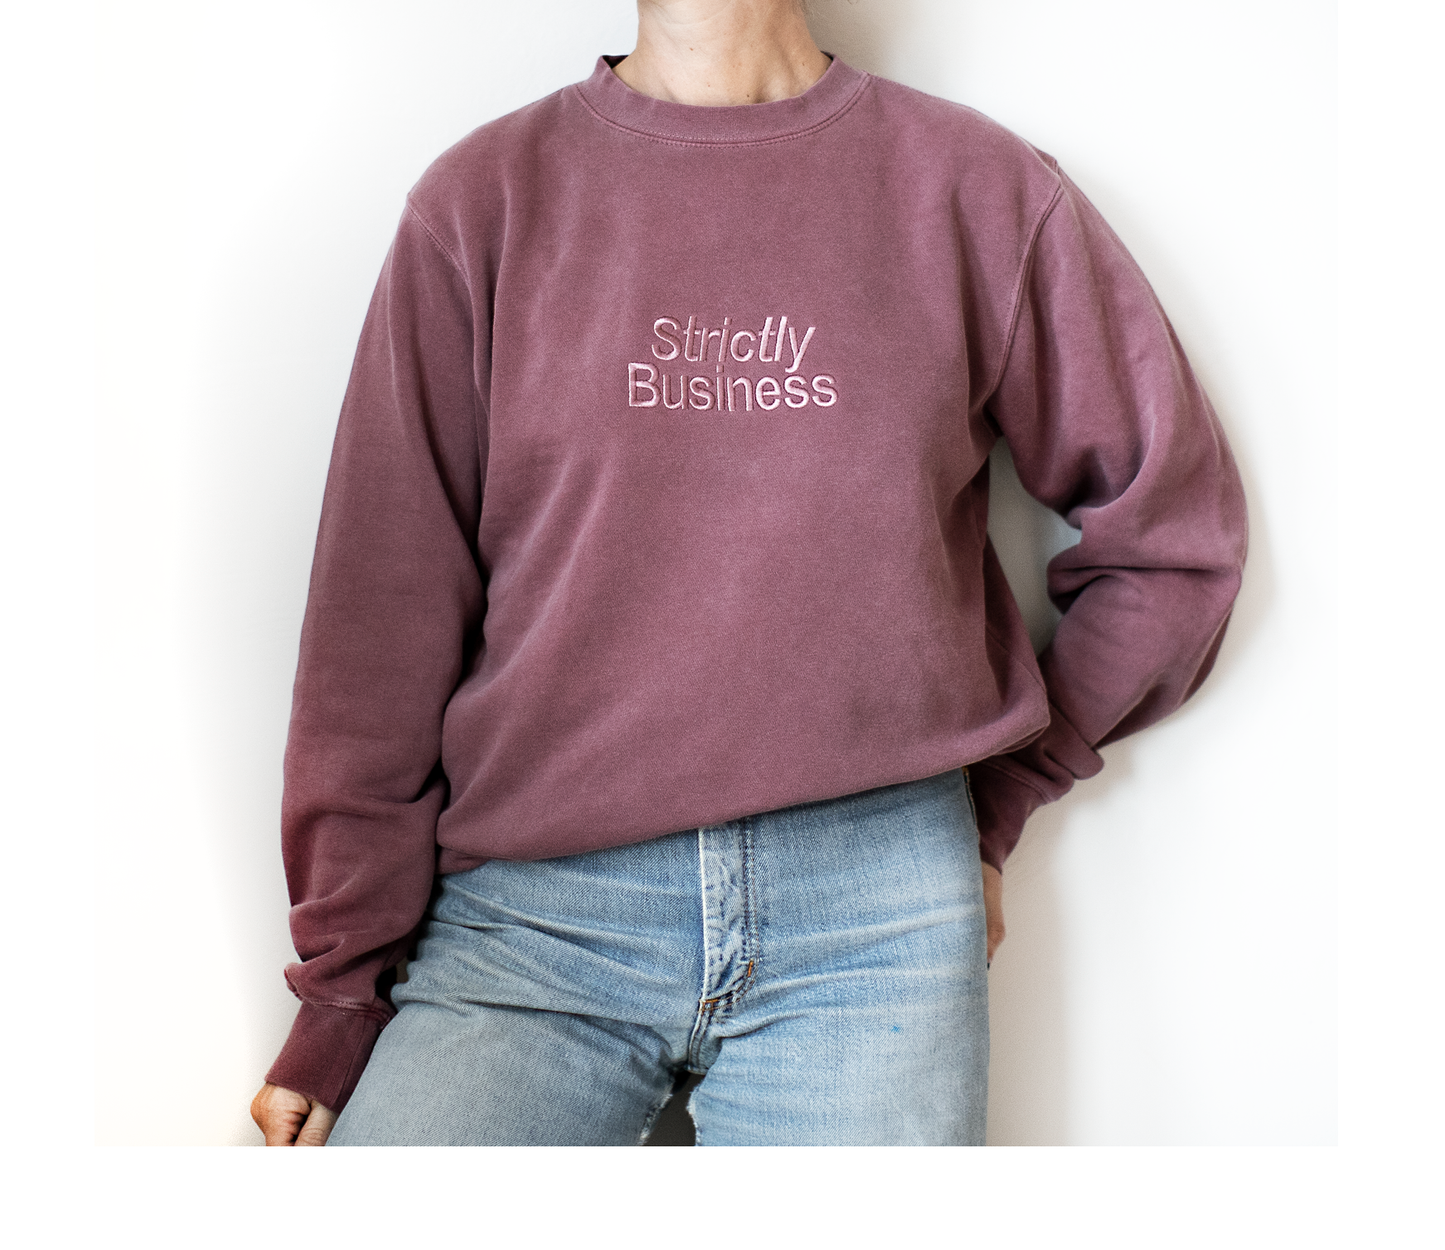 The Huddle Strictly Business Embroidered Sweatshirt